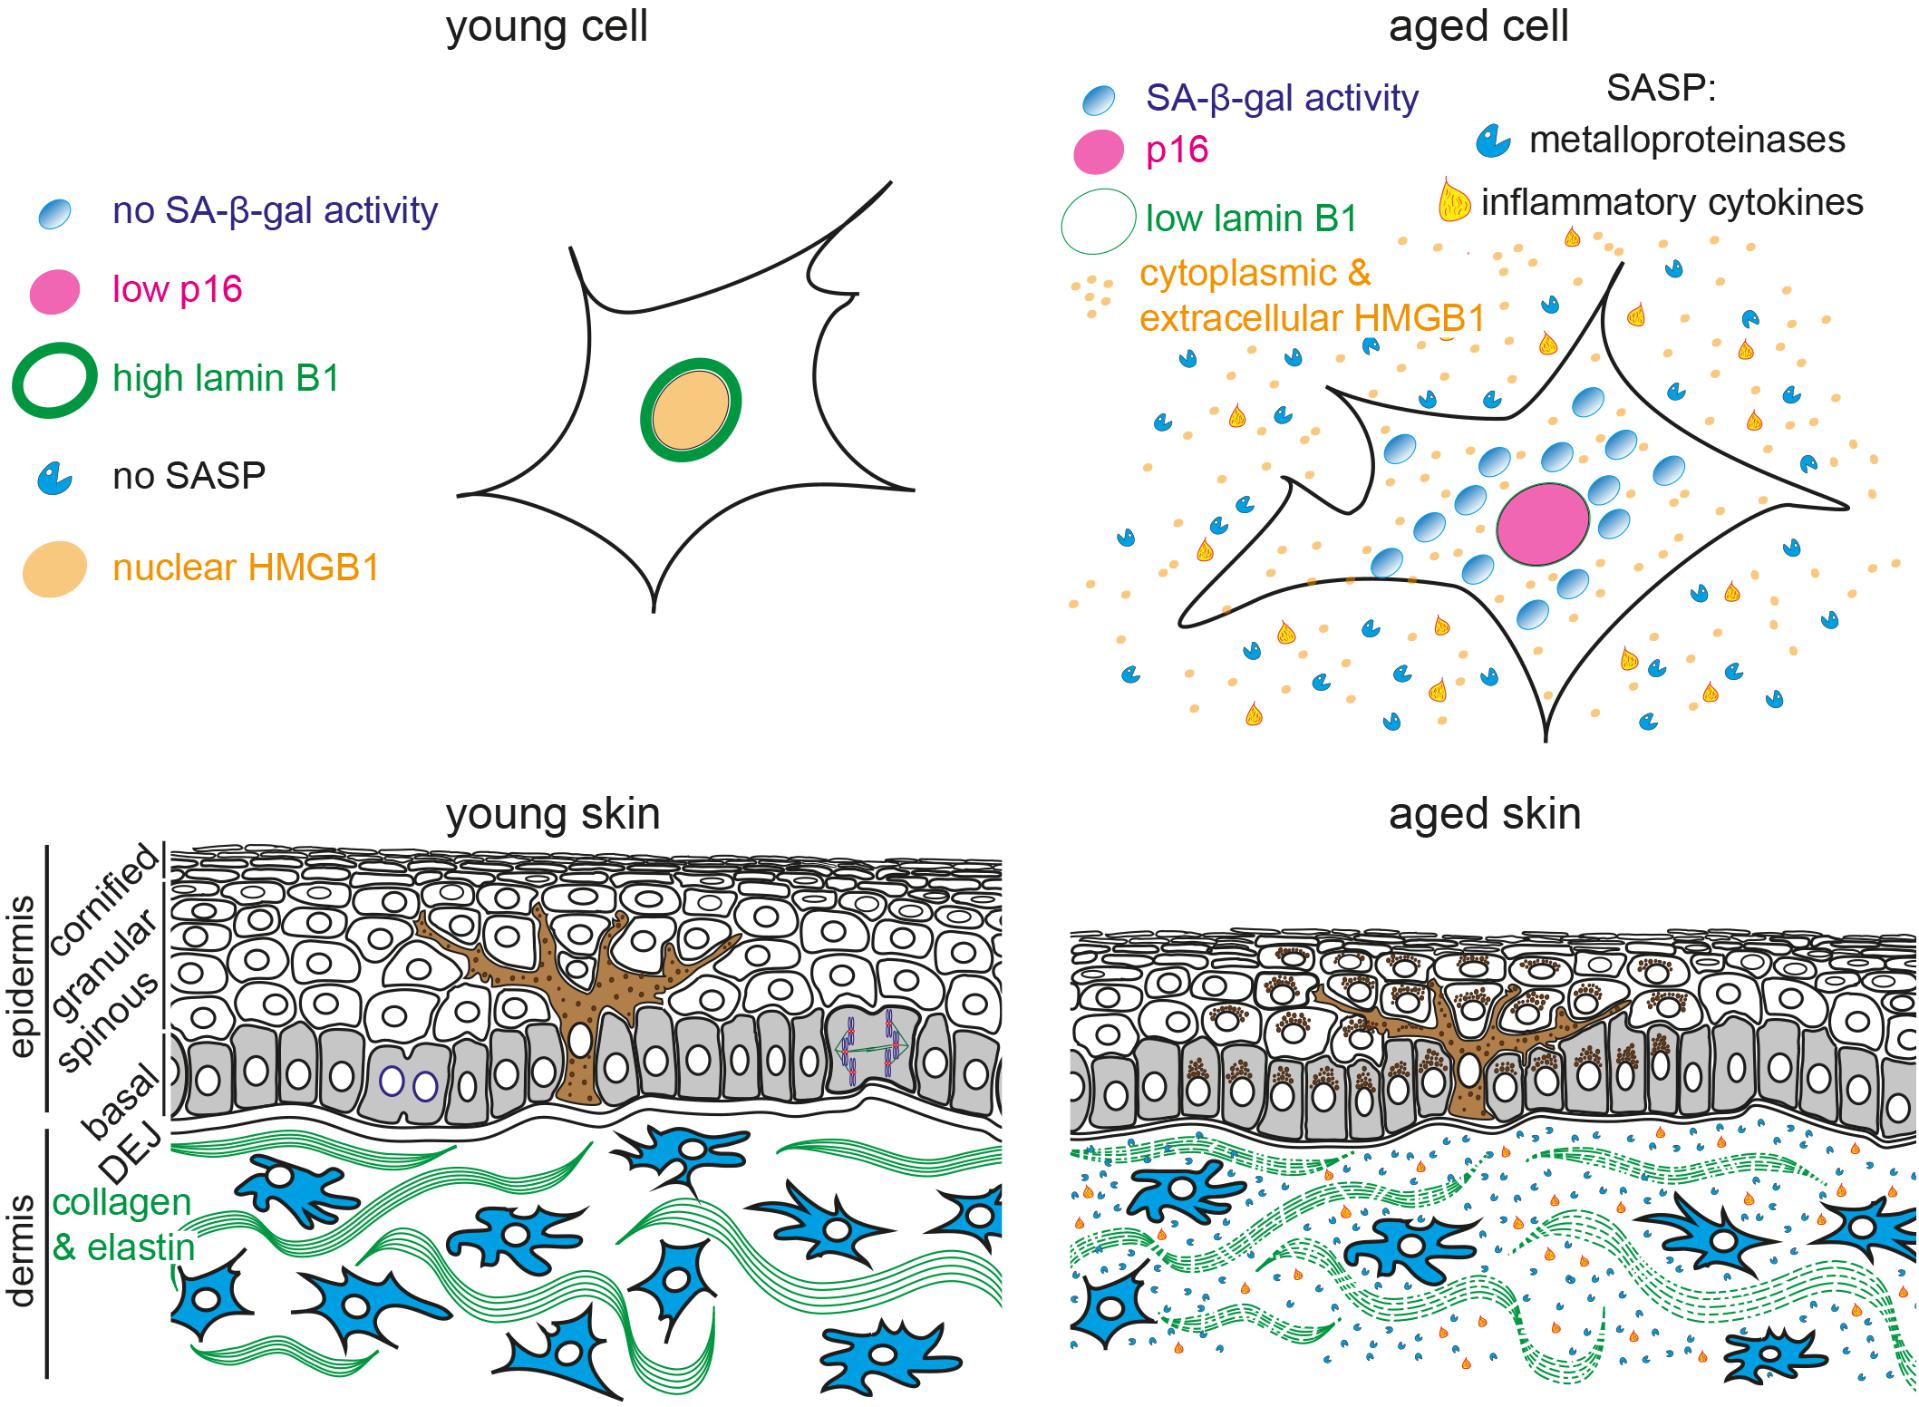 Frontiers | Biomarkers of Cellular Senescence and Skin Aging